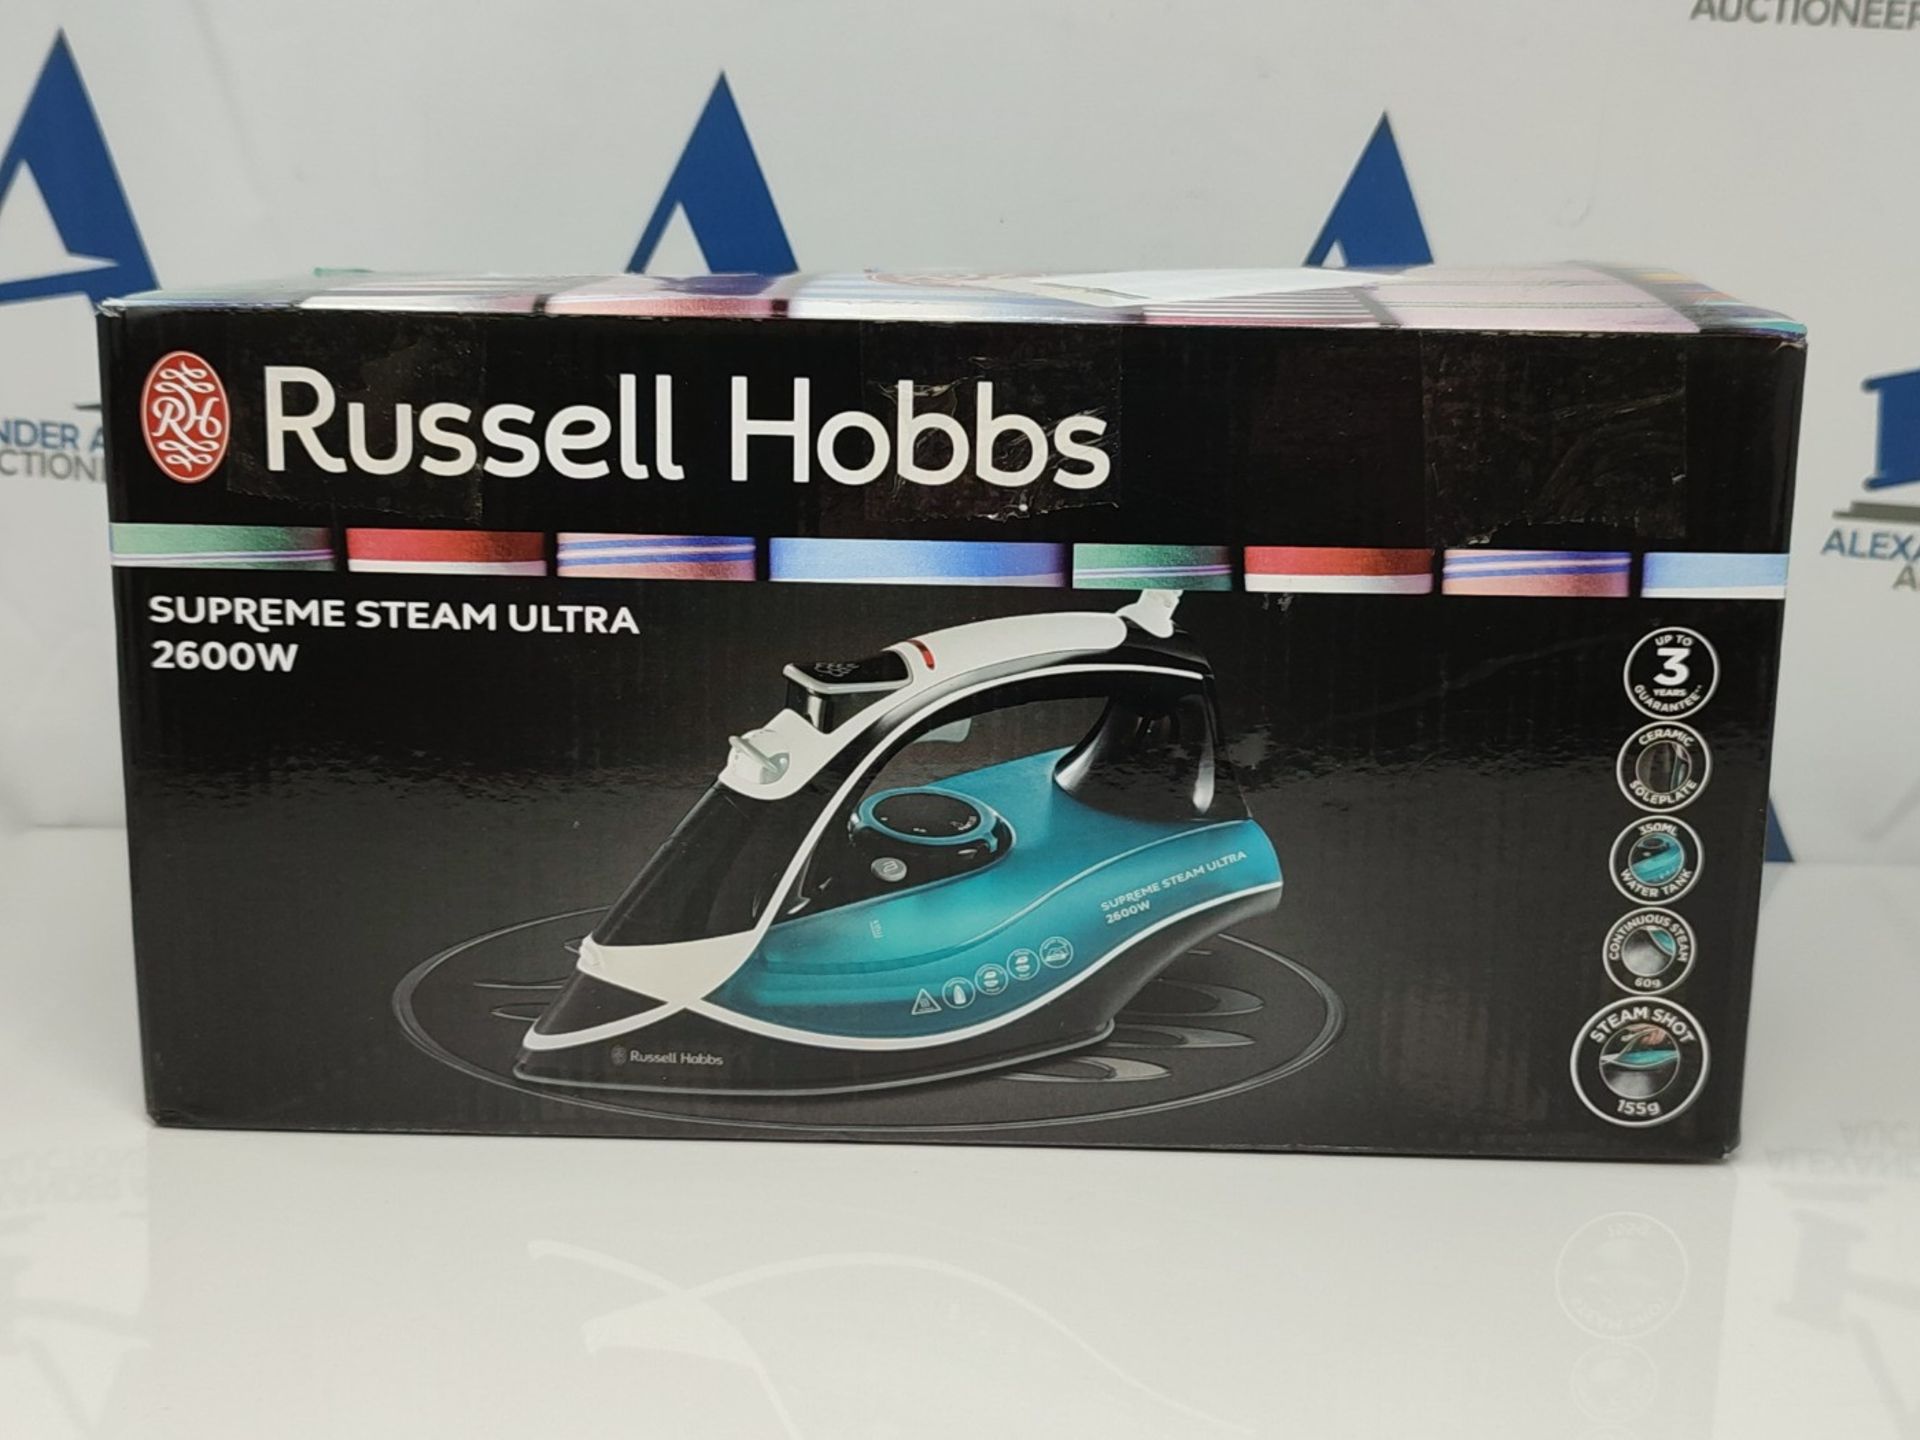 Russell Hobbs Supreme Steam Traditional Iron 23260, 2600 W - Teal/Black - Image 2 of 3